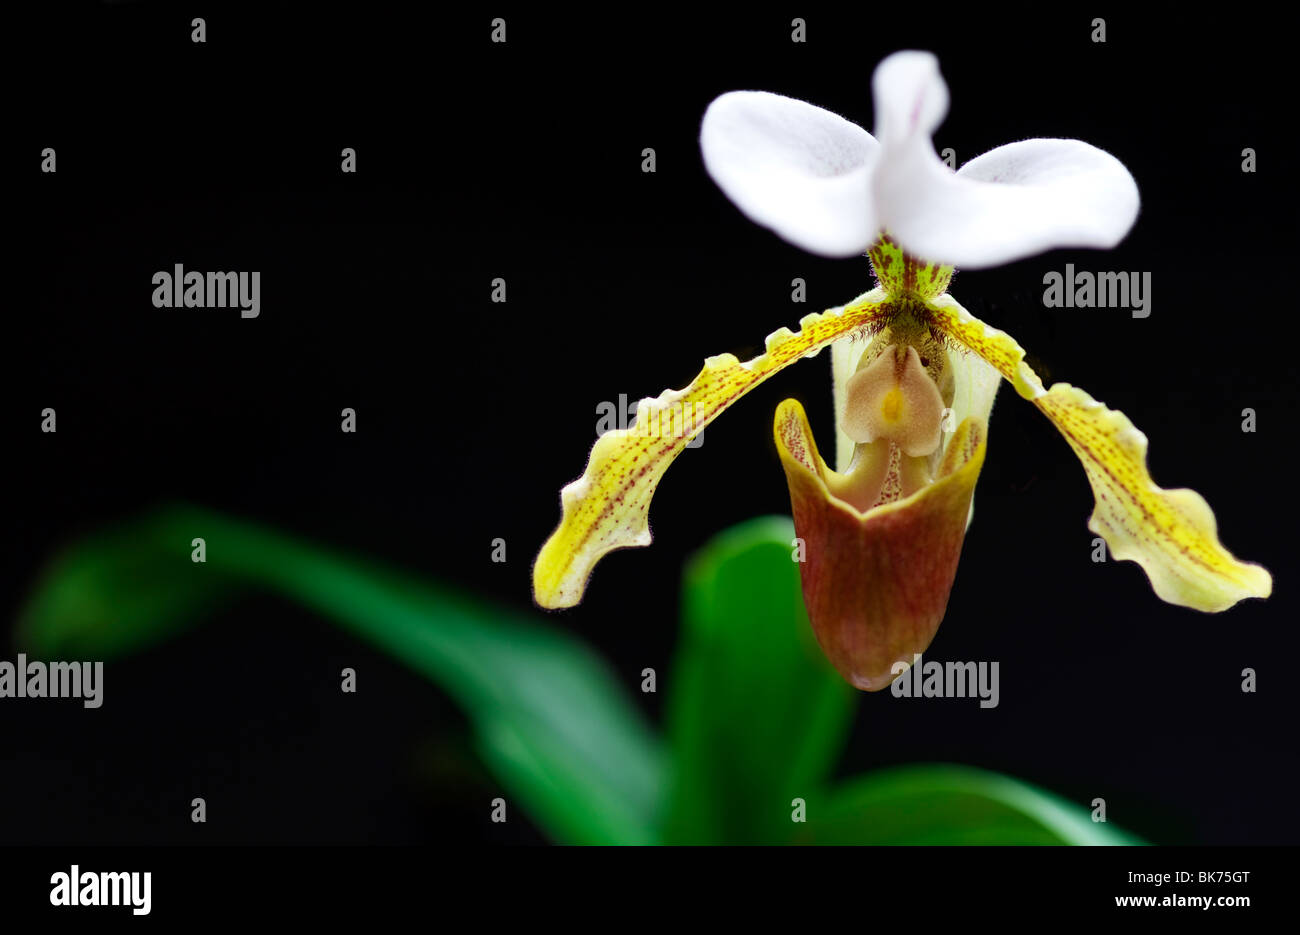 Close-up of a Paphiopedilum orchid flower Stock Photo